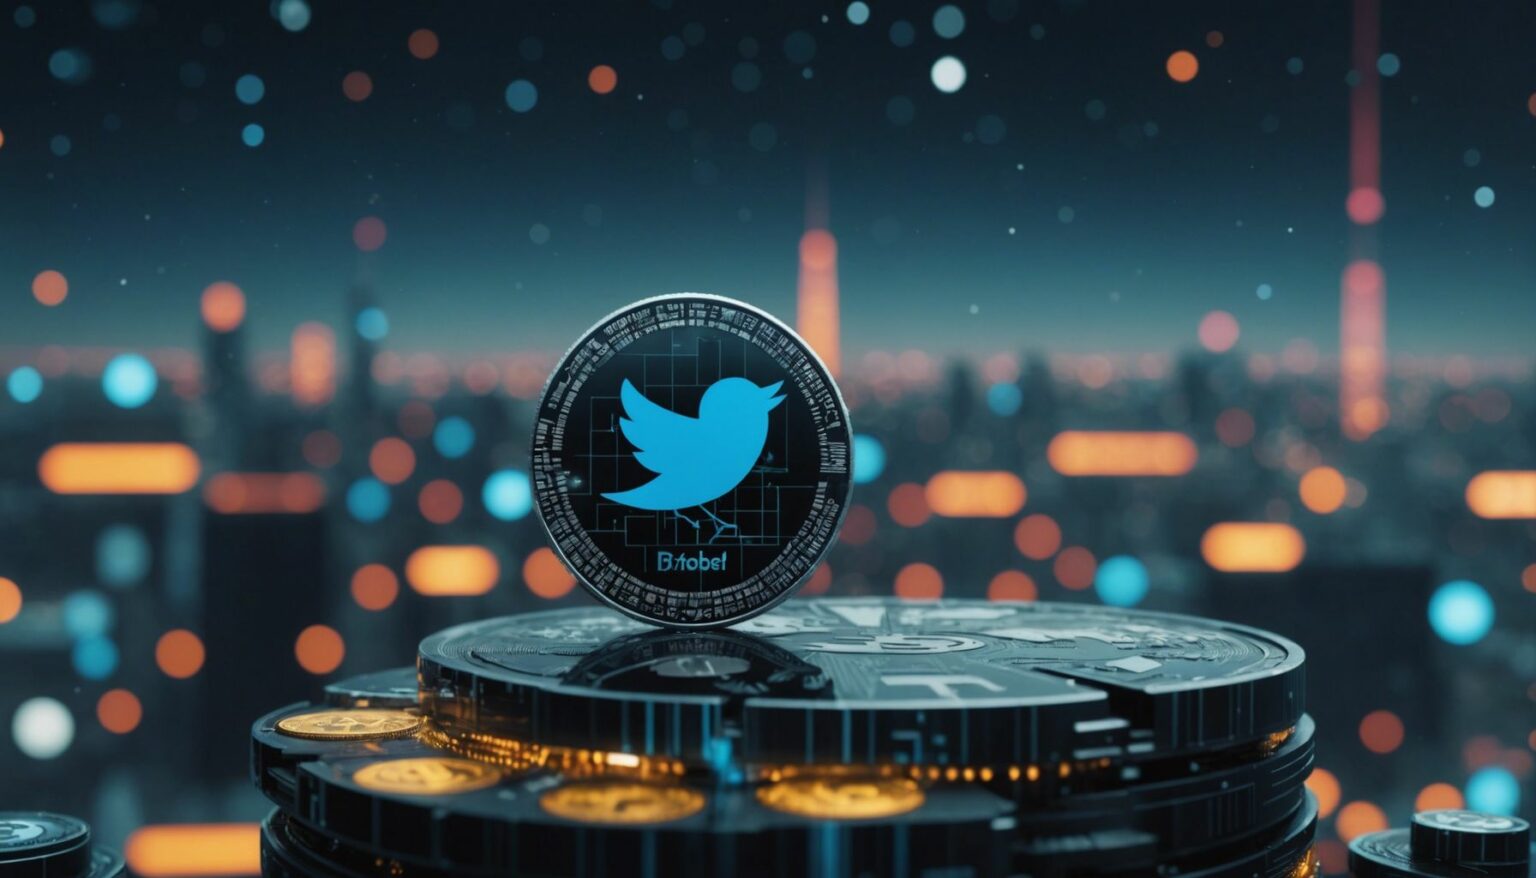 Twitter logo intertwined with cryptocurrency symbols, showcasing its impact on the future of digital currency.